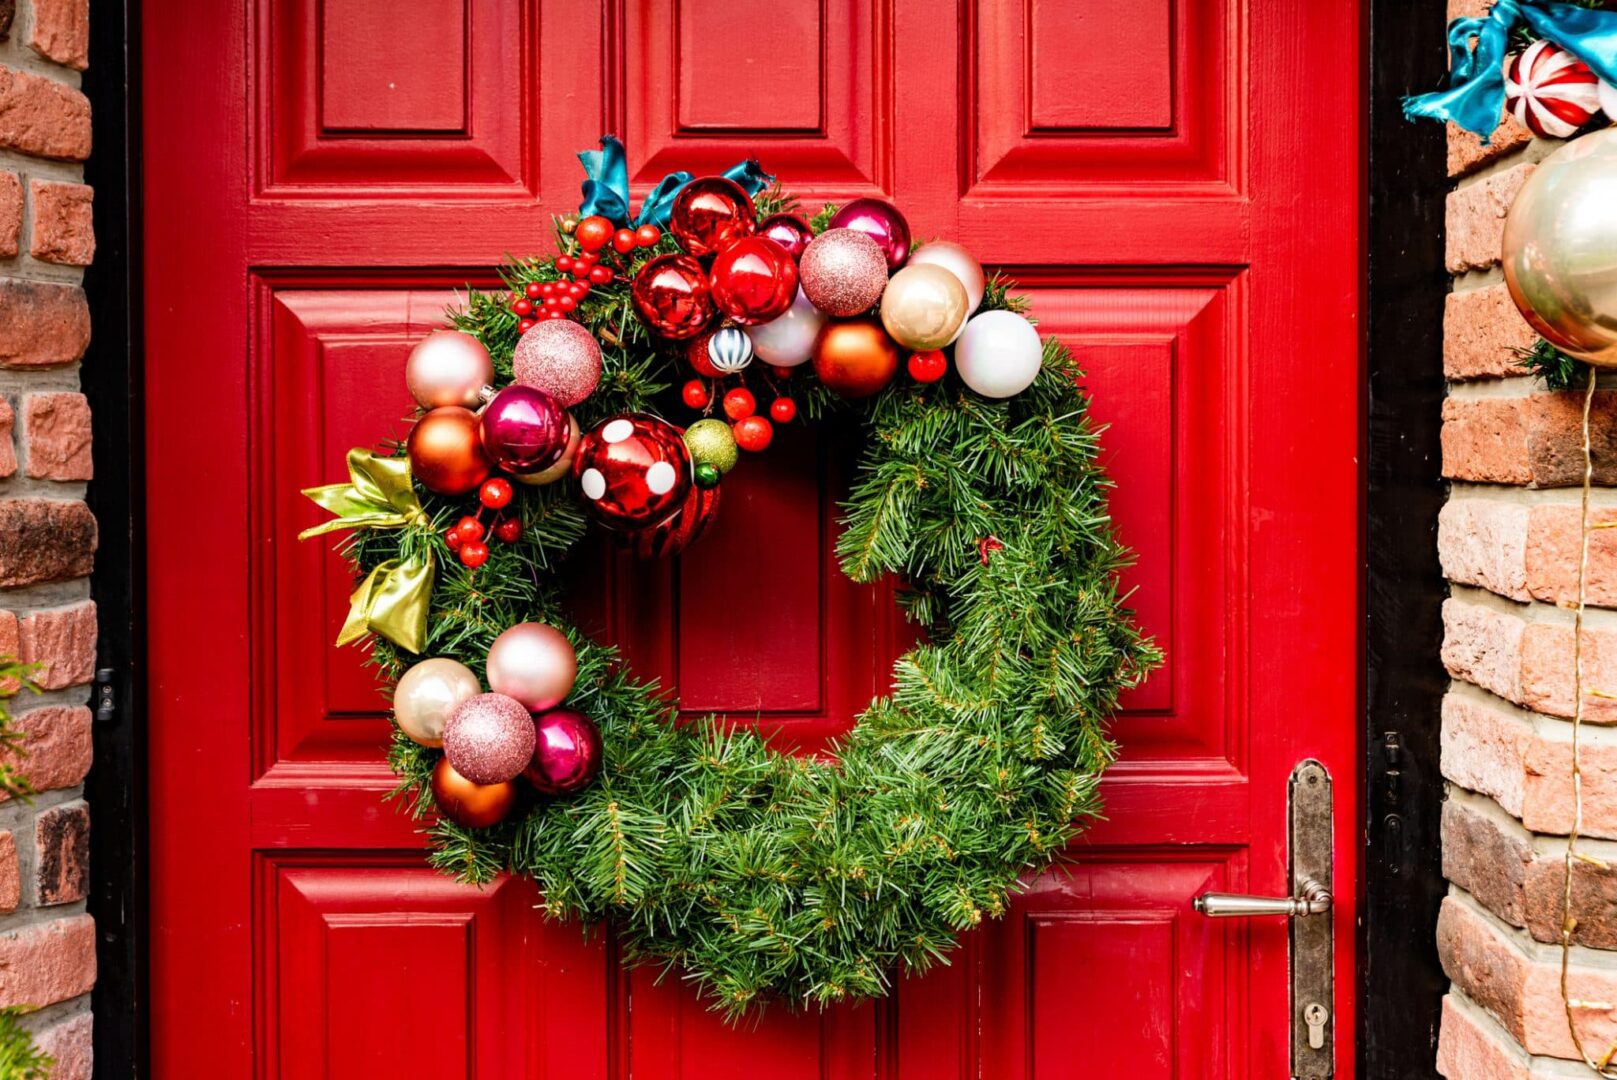 A wreath on the front door of a red house.